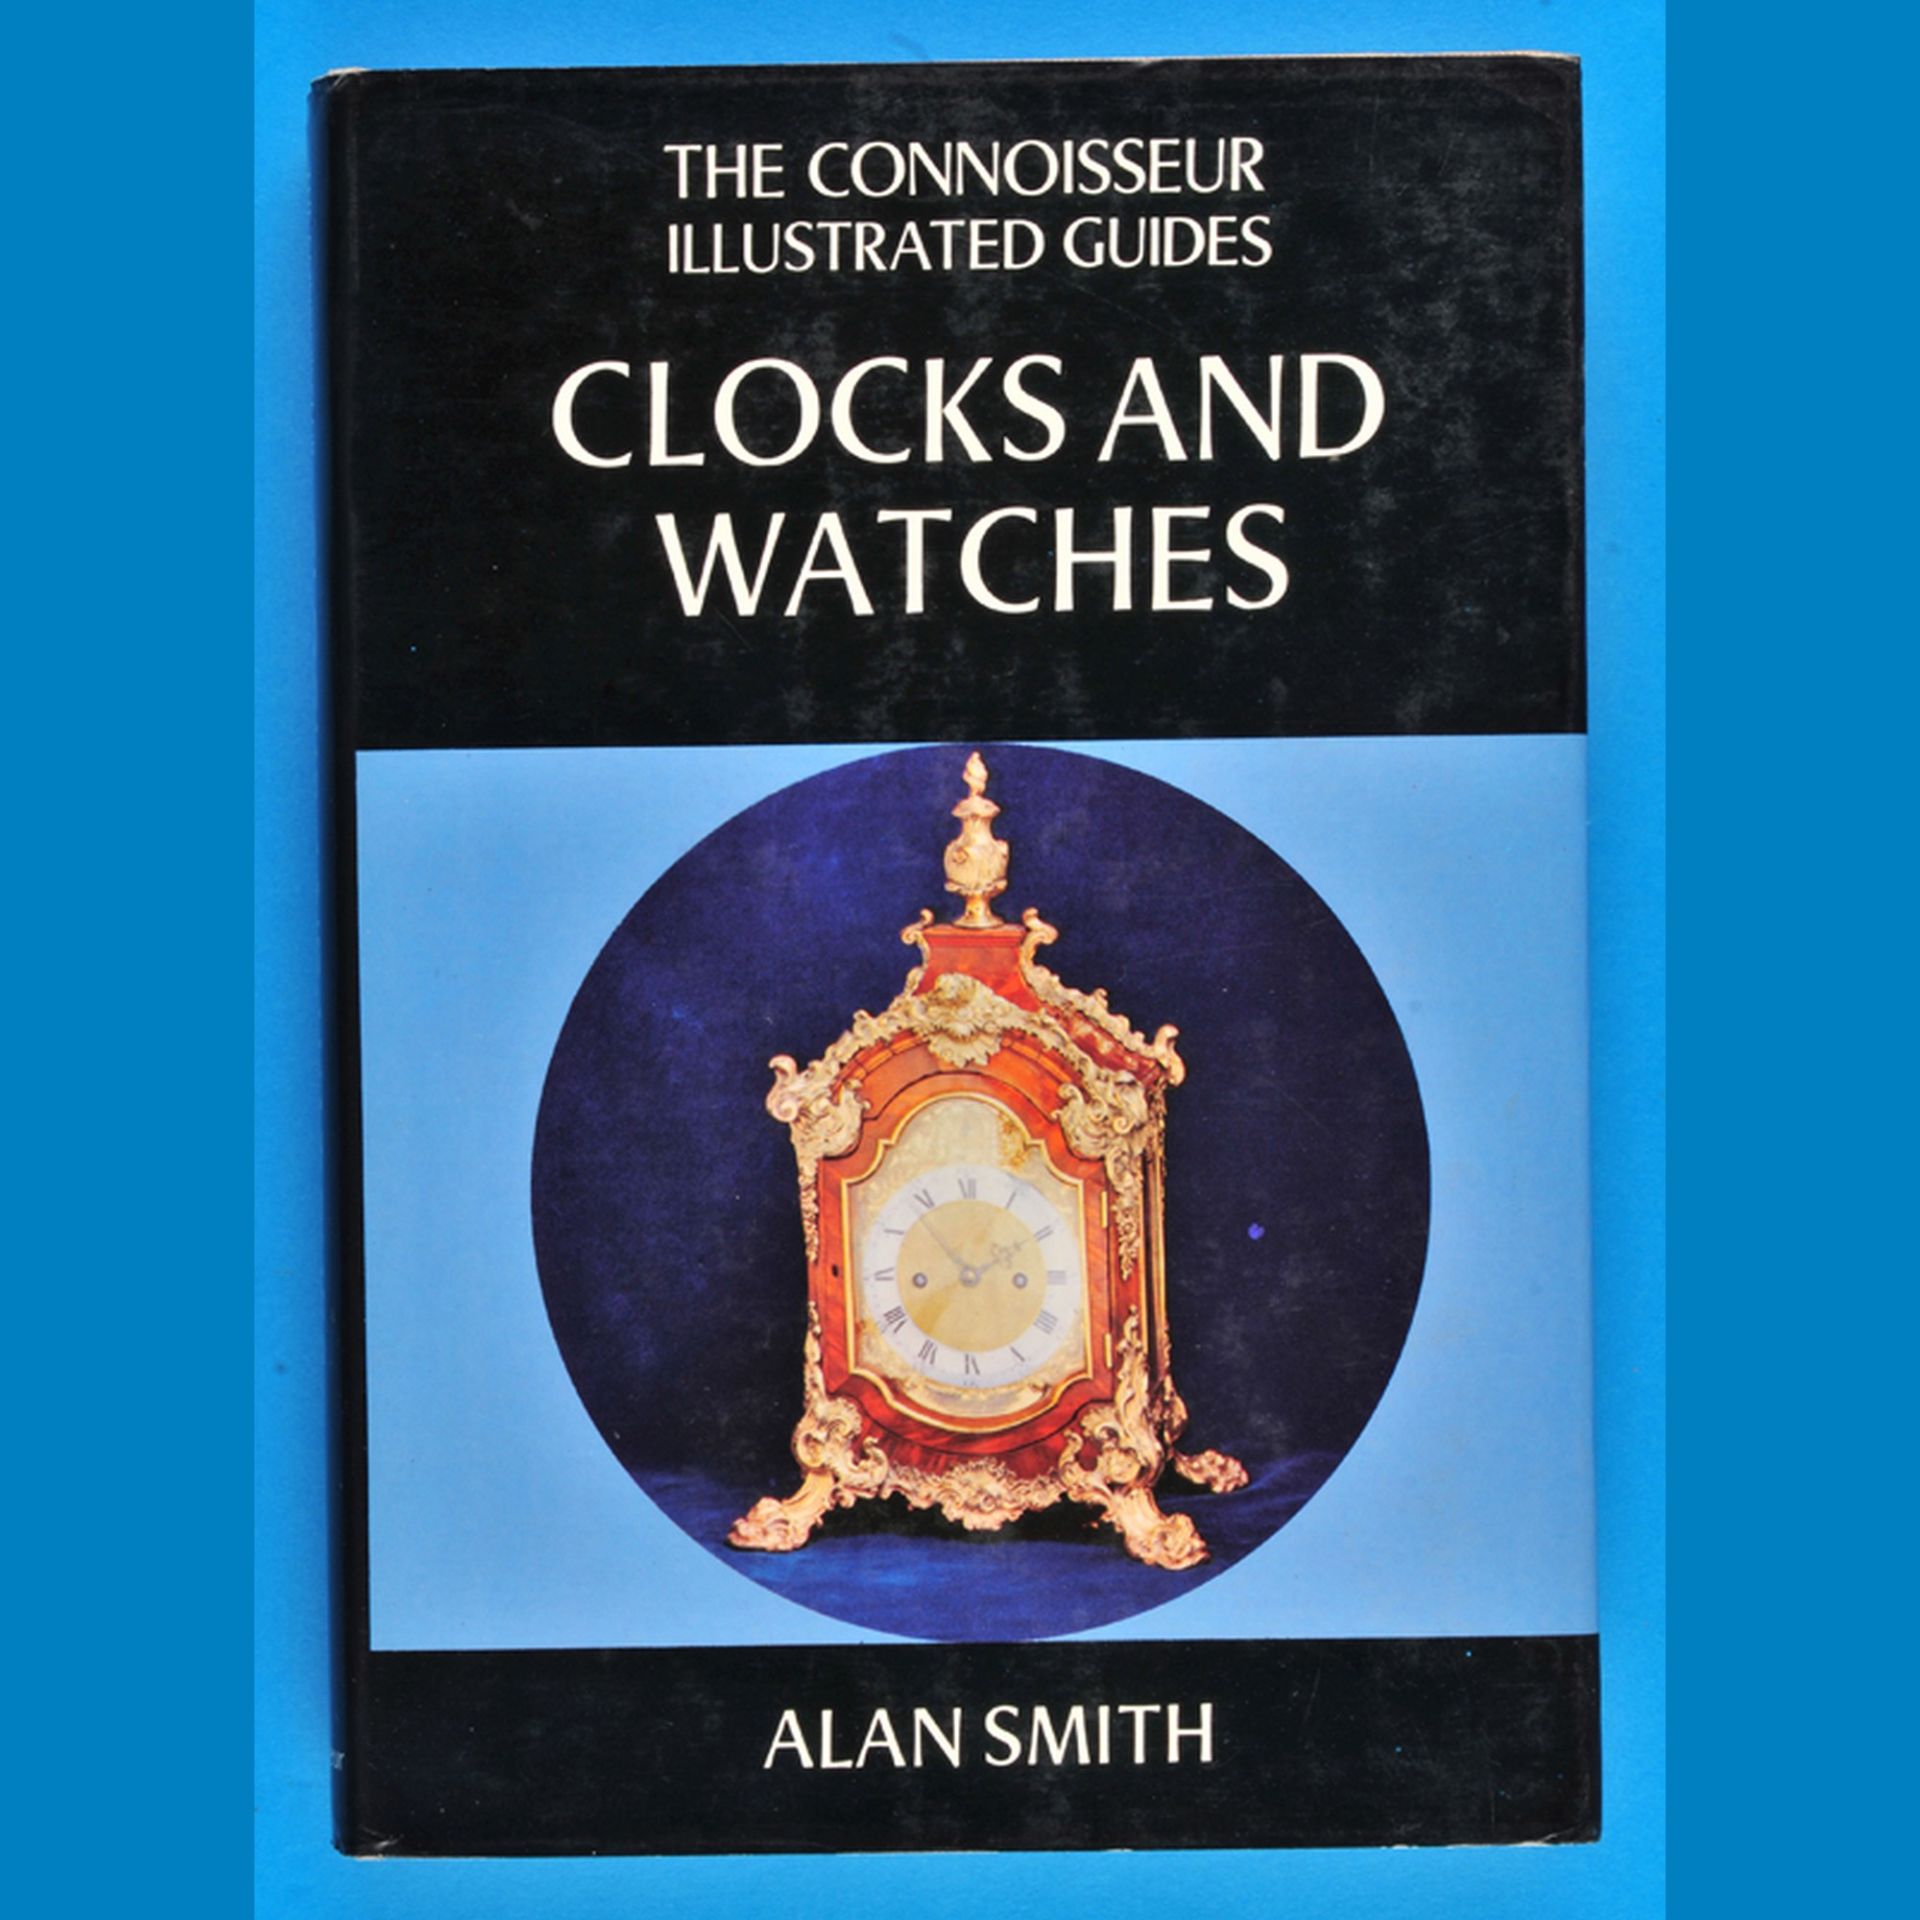 Alan Smith, The Connoisseur Illustrated Guides Clocks and Watches, 1975, 222 Seiten mit Farb- und